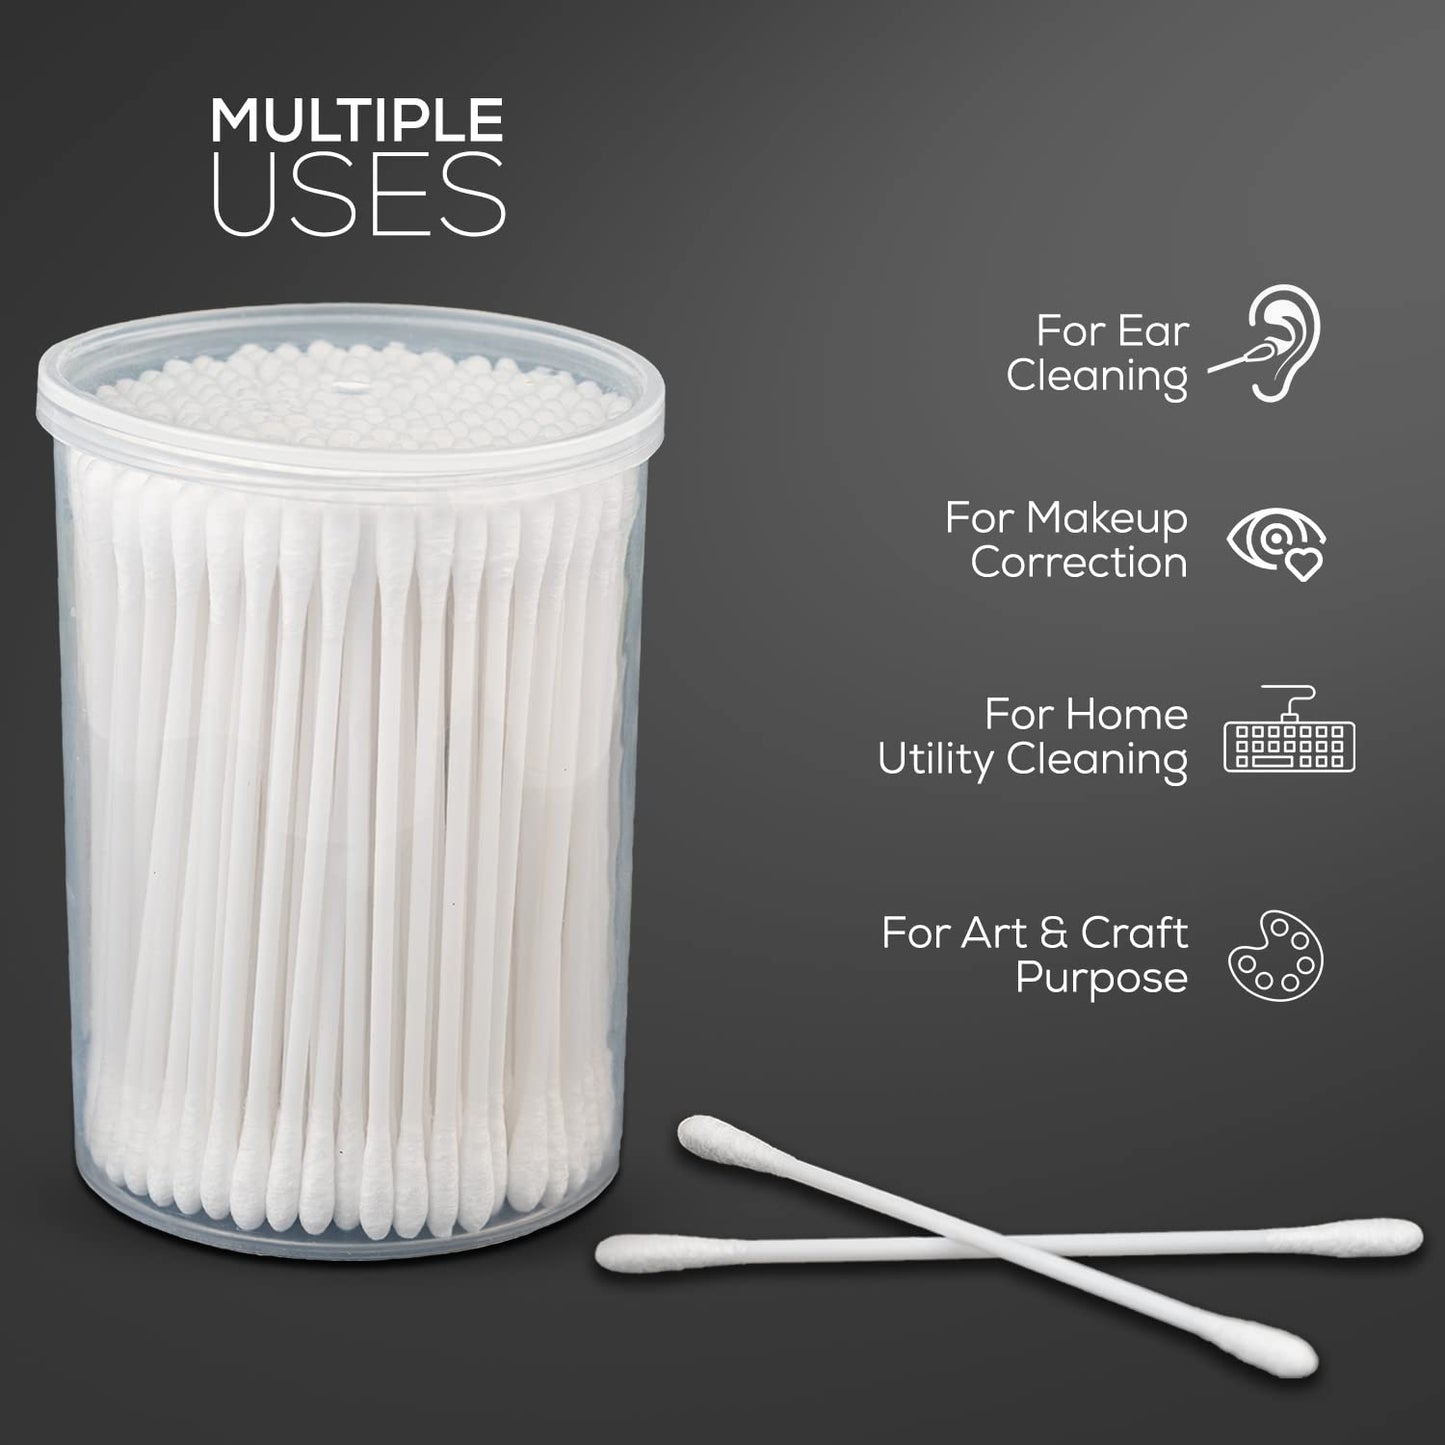 Baybee 600 Pcs Baby Cotton Swab Ear Buds Cleaner, Safe & Hygienic for Babies - Pack of 3